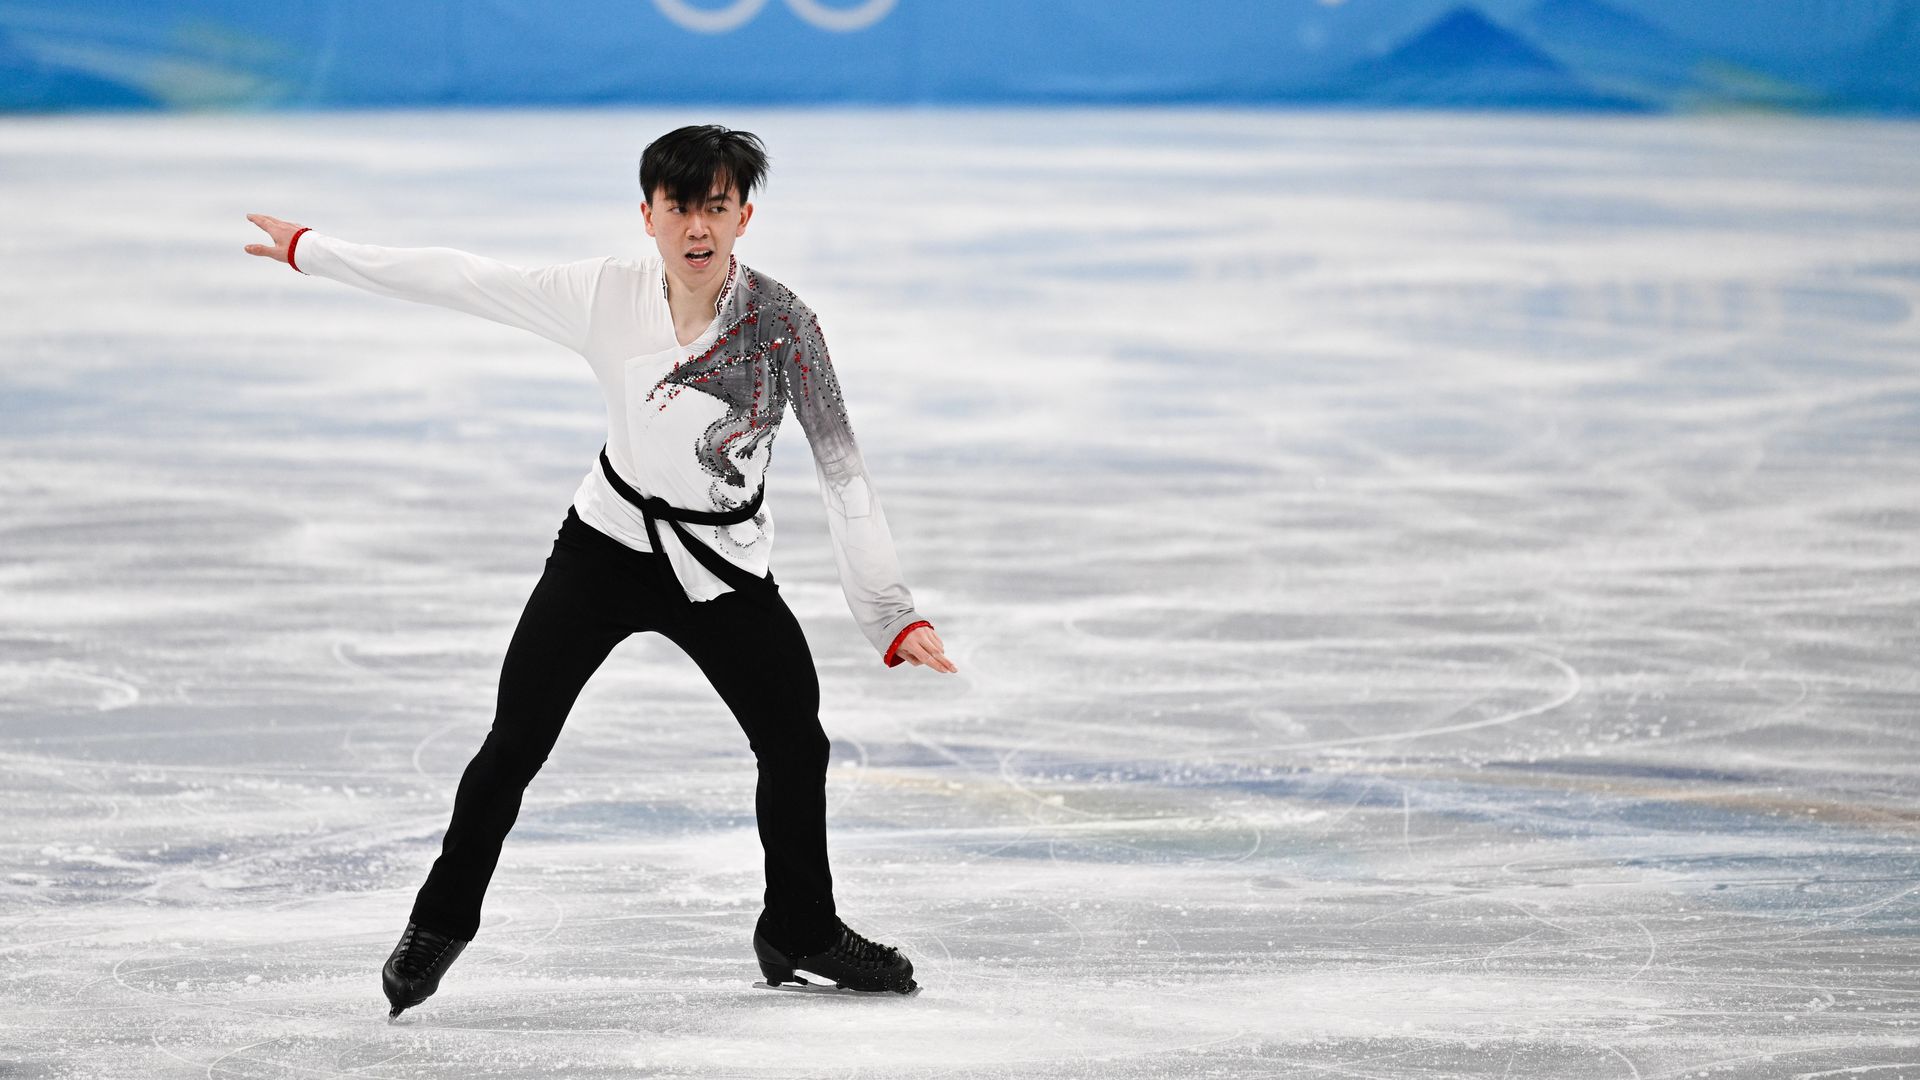 Vincent Zhou of USA in action at the Team Event Men Single Skating Short Program during the Beijing 2022 Winter Olympics at Capital Indoor Stadium on February 6, 2022 in Beijing, China.